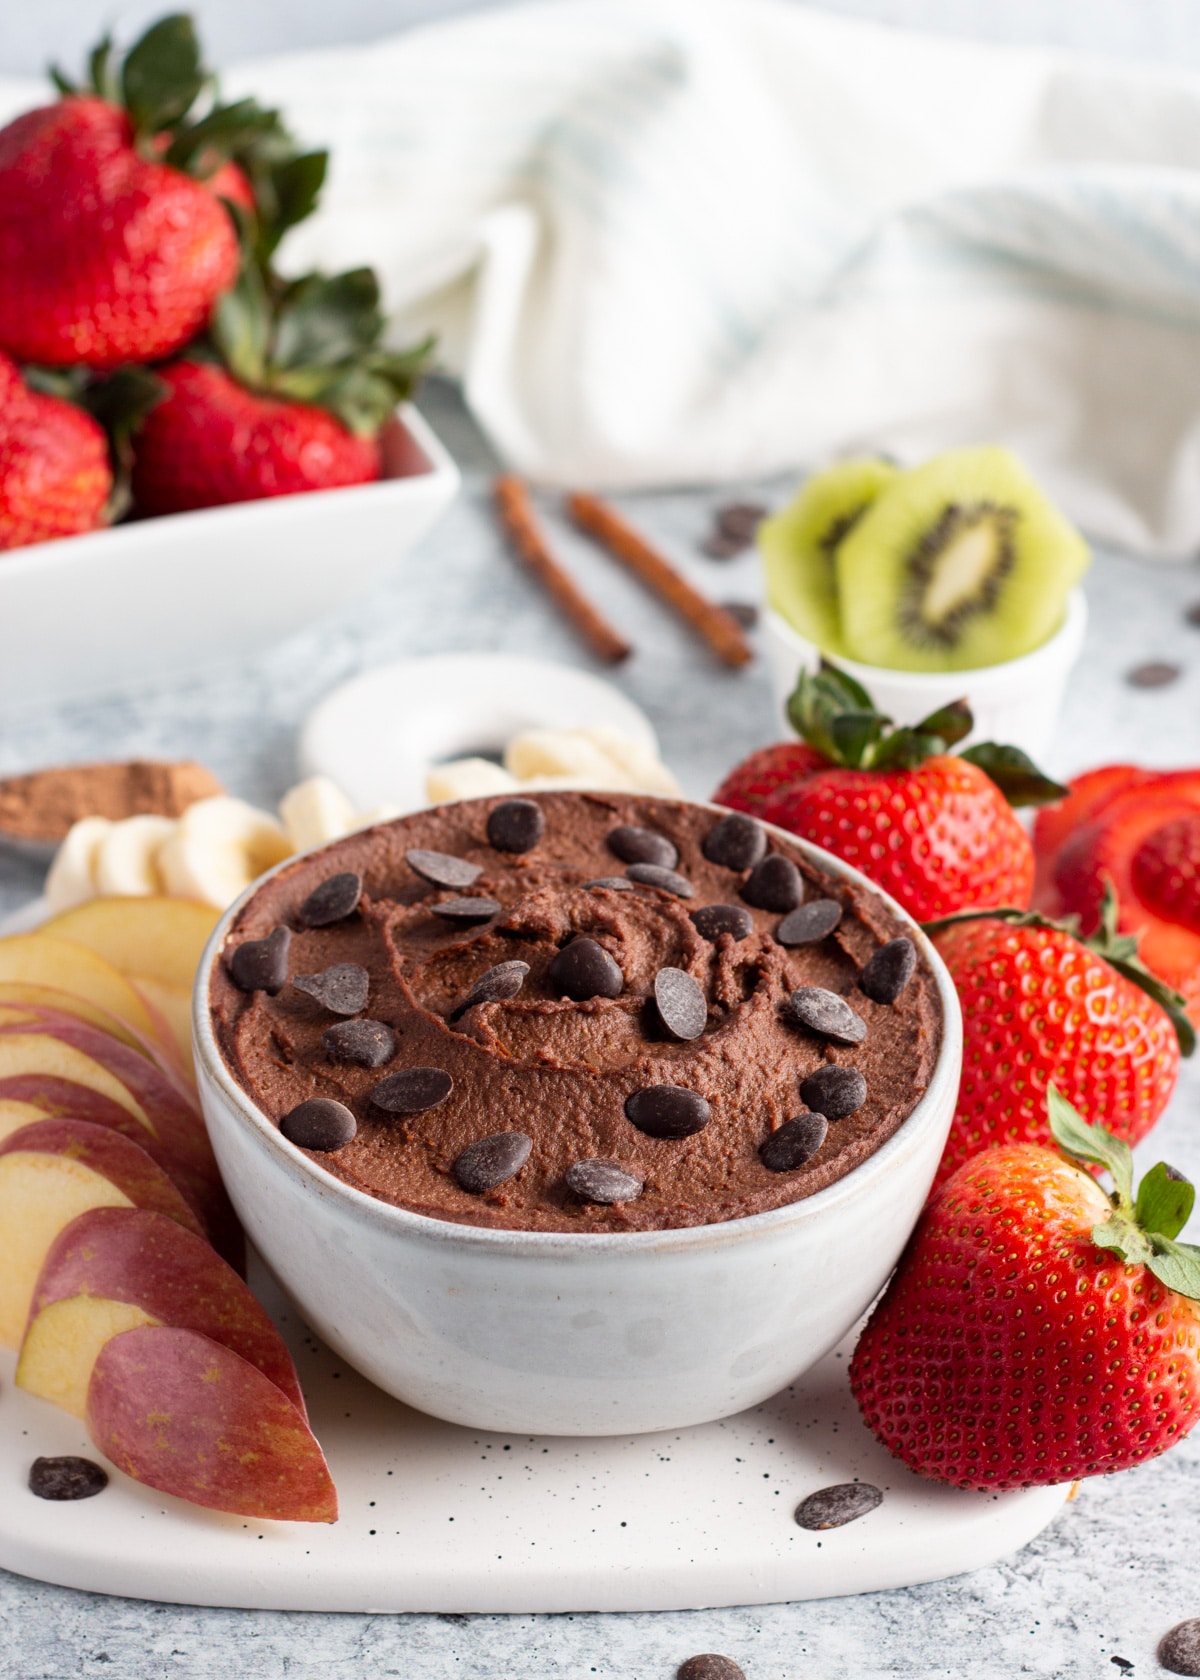 dark chocolate hummus picture in a bowl with fruits around including apple, strawberries, banana and kiwi.